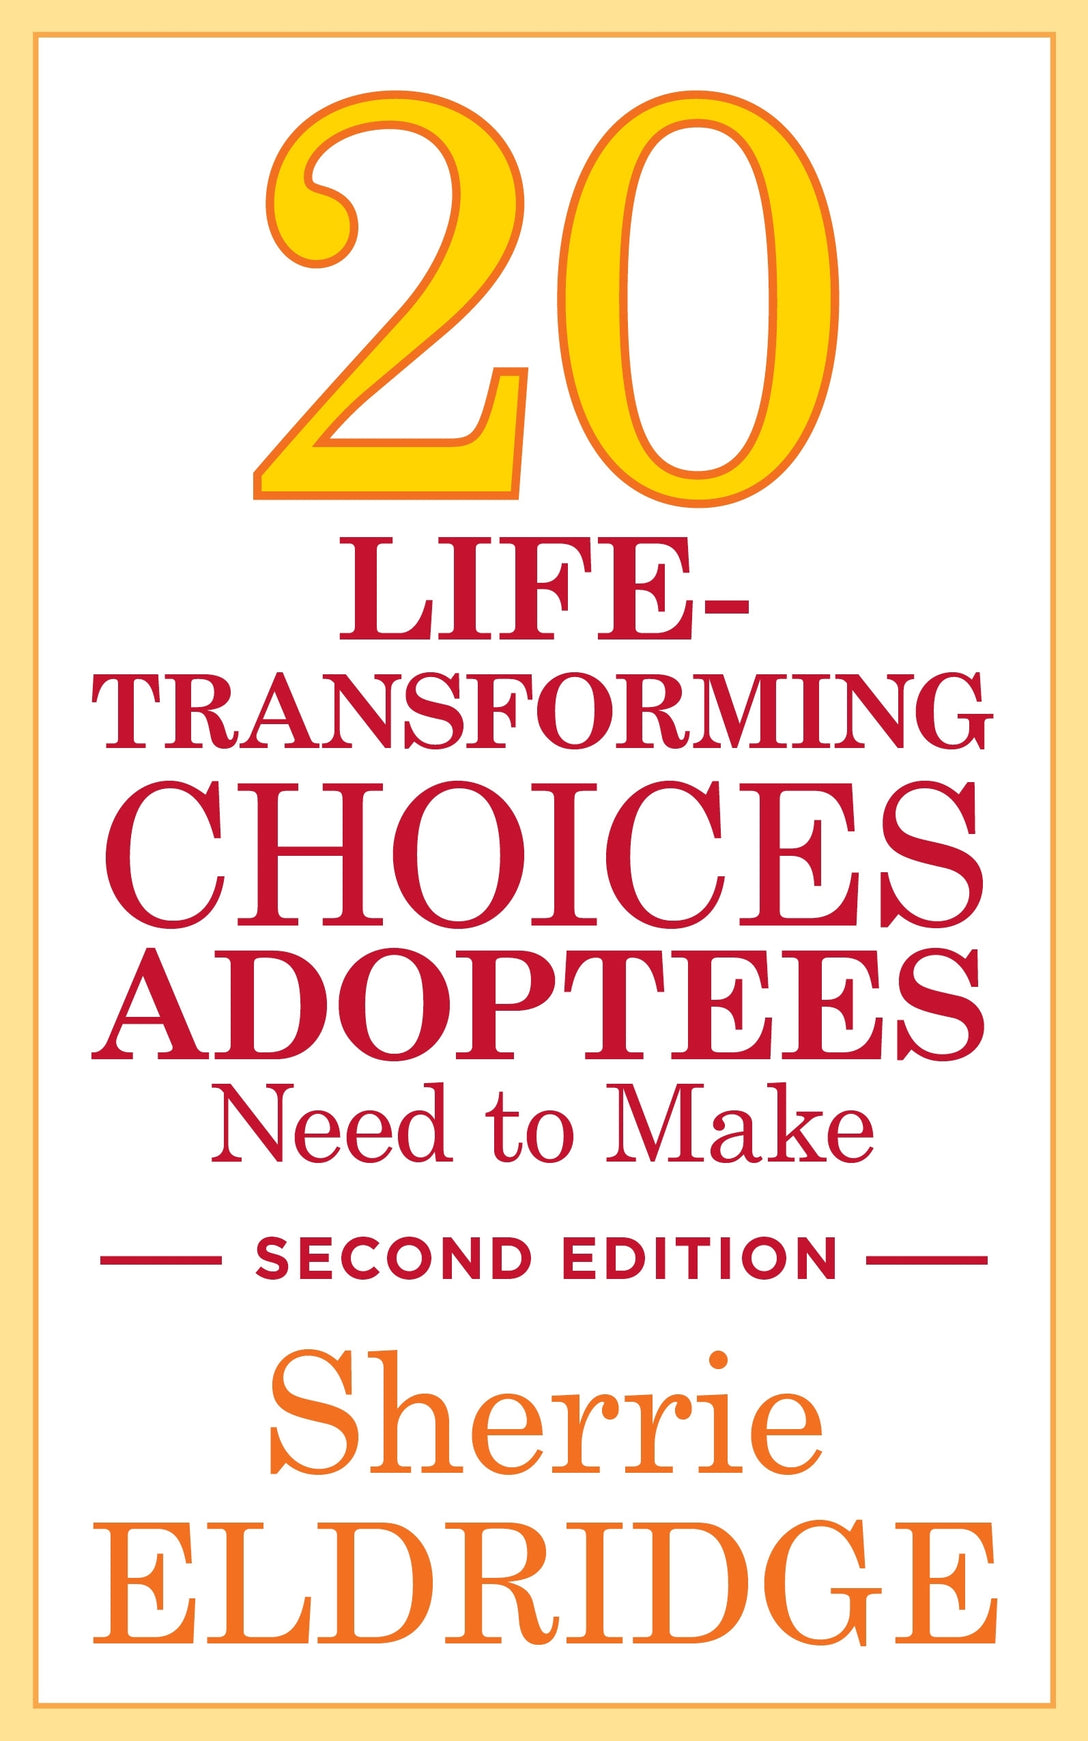 20 Life-Transforming Choices Adoptees Need to Make, Second Edition by Sherrie Eldridge